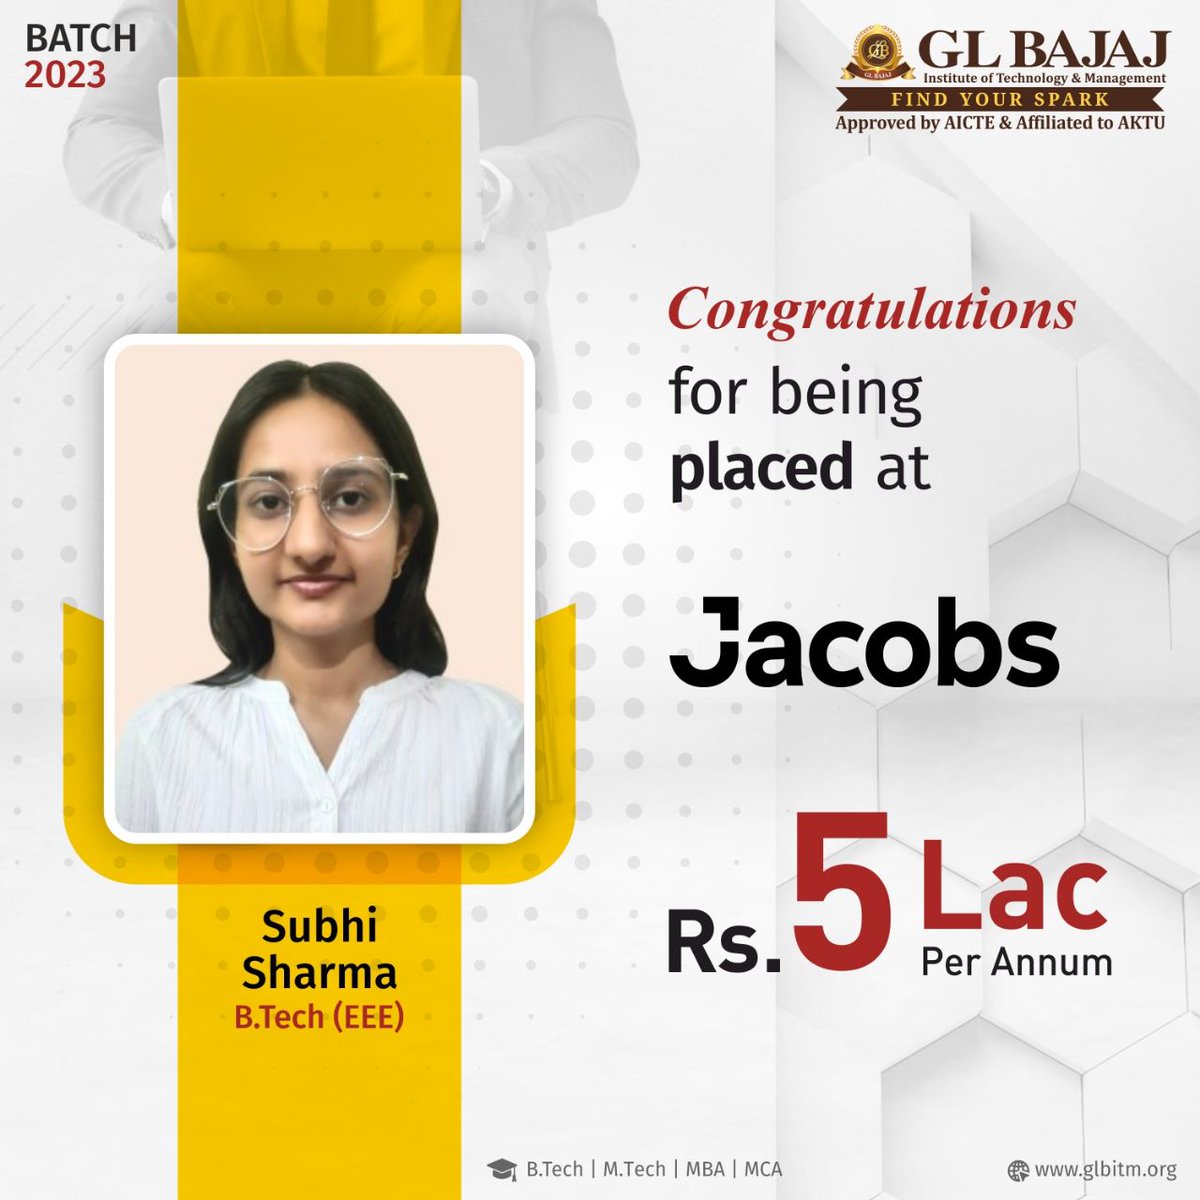 #GLBajaj(GLBITM) is proud to announce the placement of its bright student Subhi Sharma, B.Tech EEE Batch 2023 in one of the leading technology firms Jacobs.
#collegeplacement #campusplacement #bestcollege #bestplacement #job #recruitment #placements2023